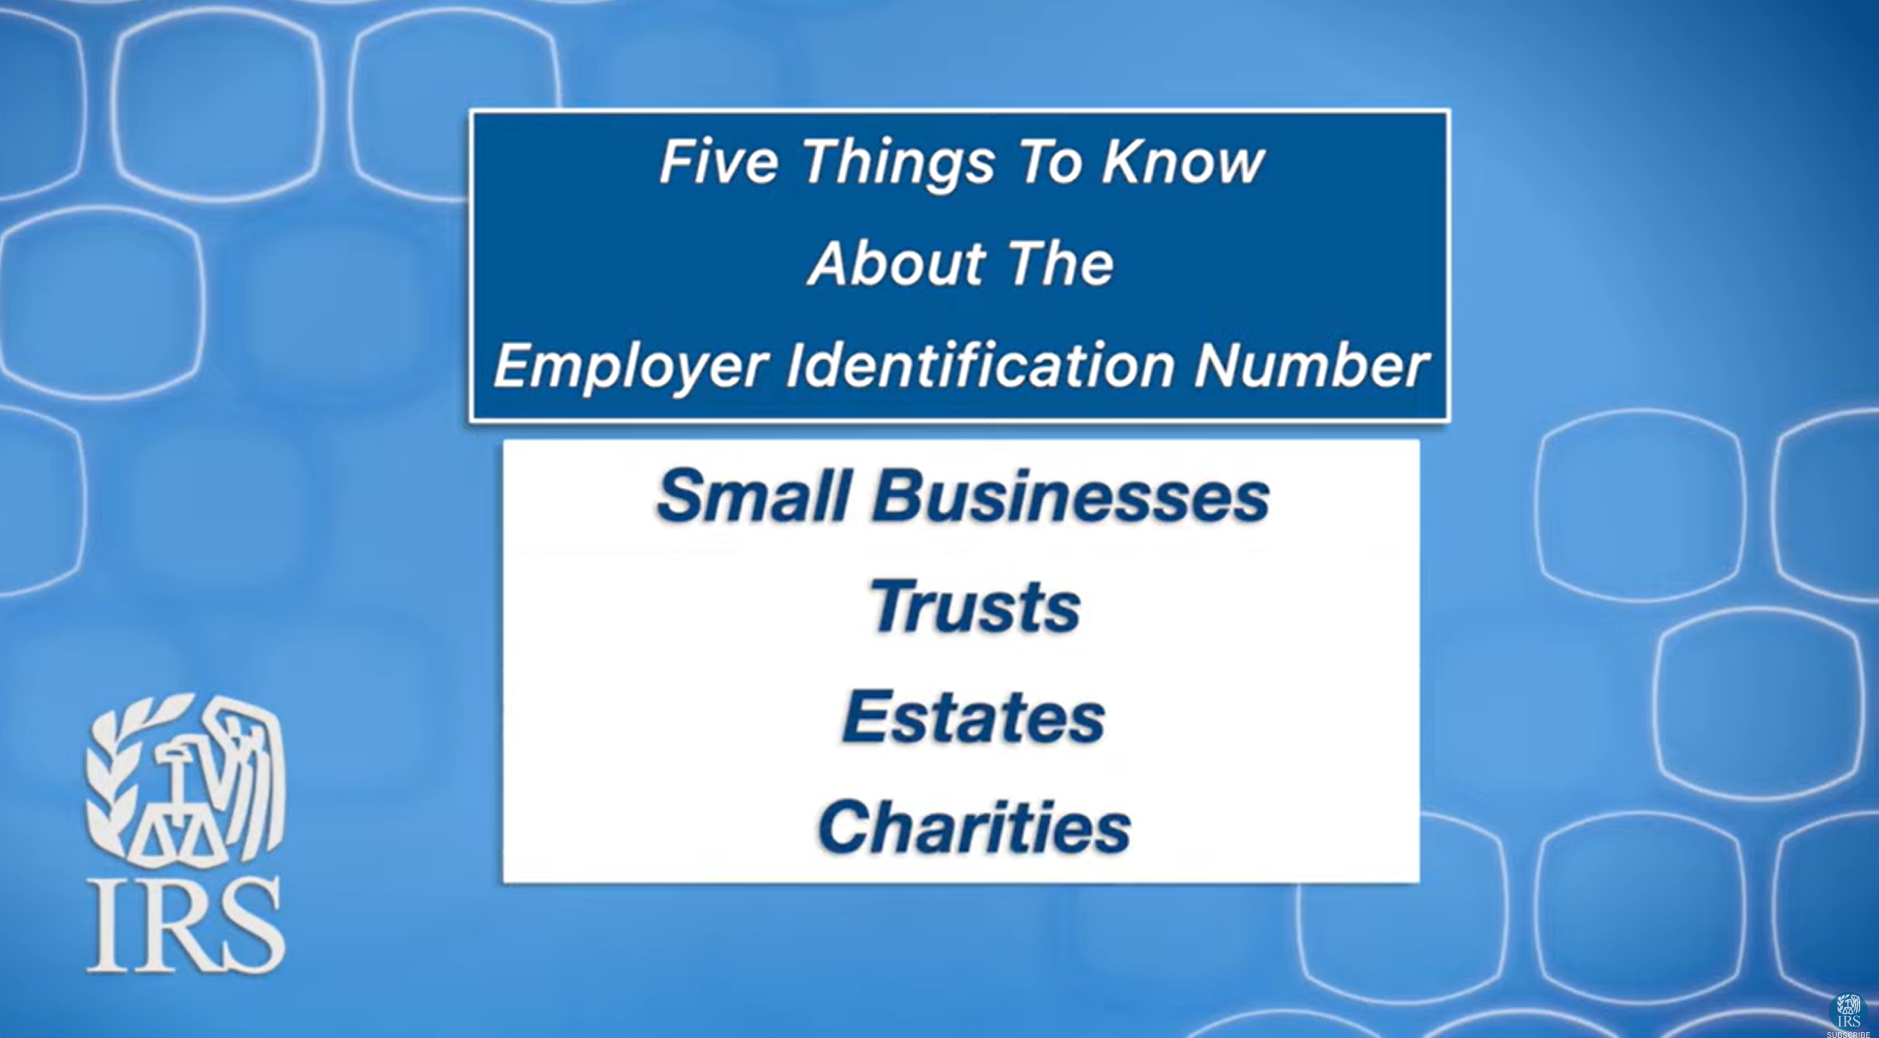 FIVE THINGS TO KNOW ABOUT THE EMPLOYER IDENTIFICATION NUMBER